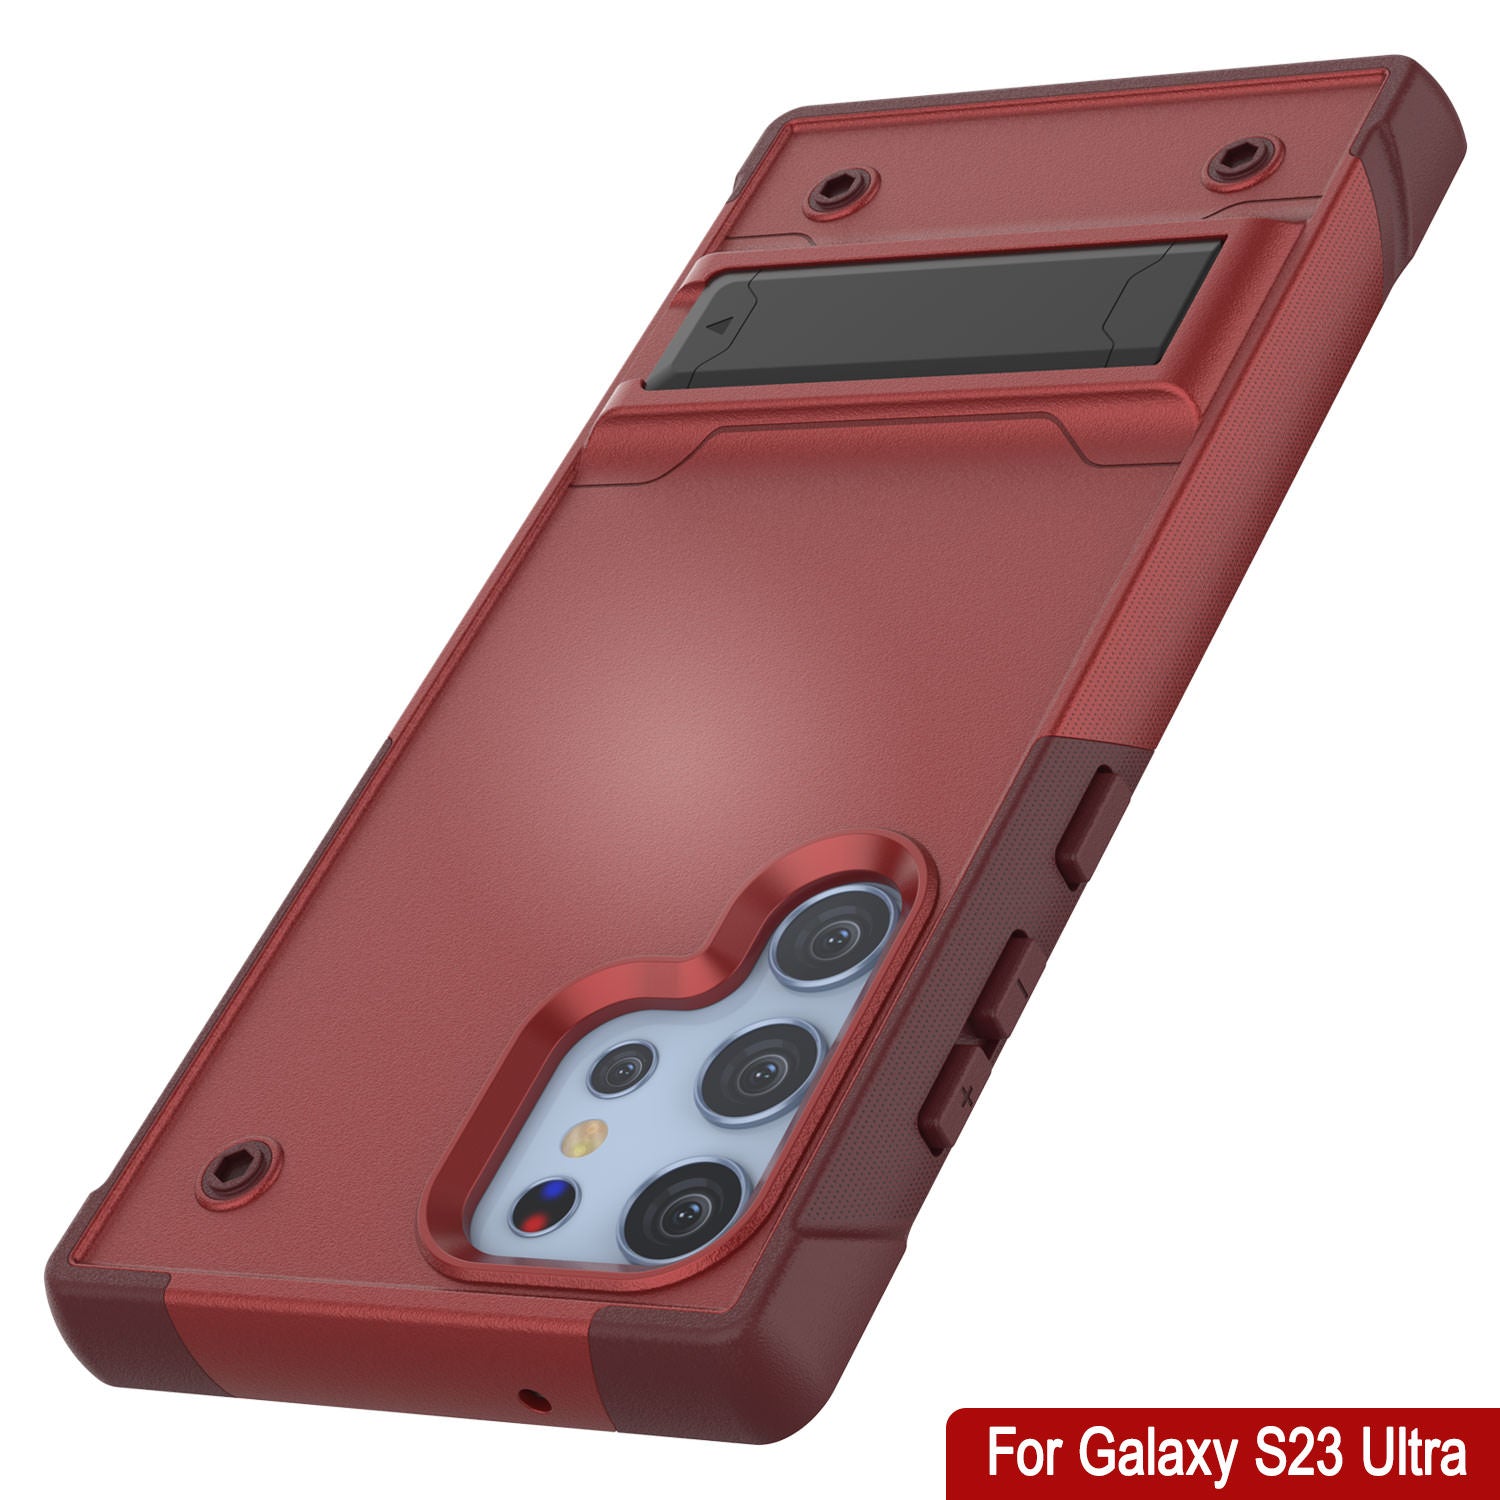 Punkcase Galaxy S23 Ultra Case [Reliance Series] Protective Hybrid Military Grade Cover W/Built-in Kickstand [Red-Rose]